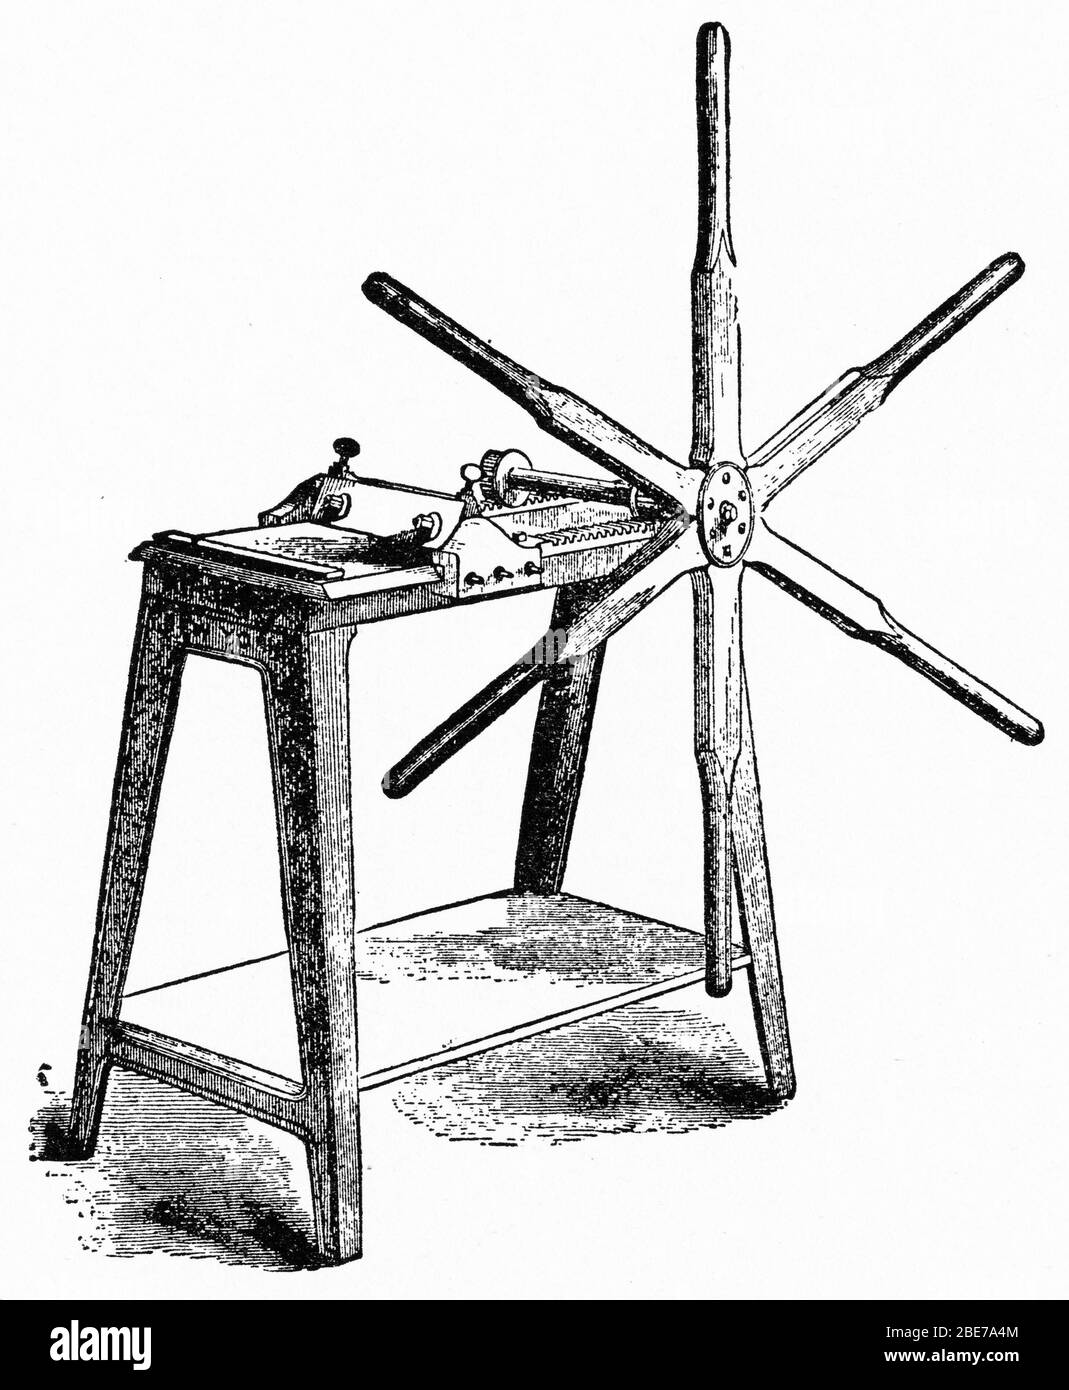 Engraving of a hand operated planing machine Stock Photo